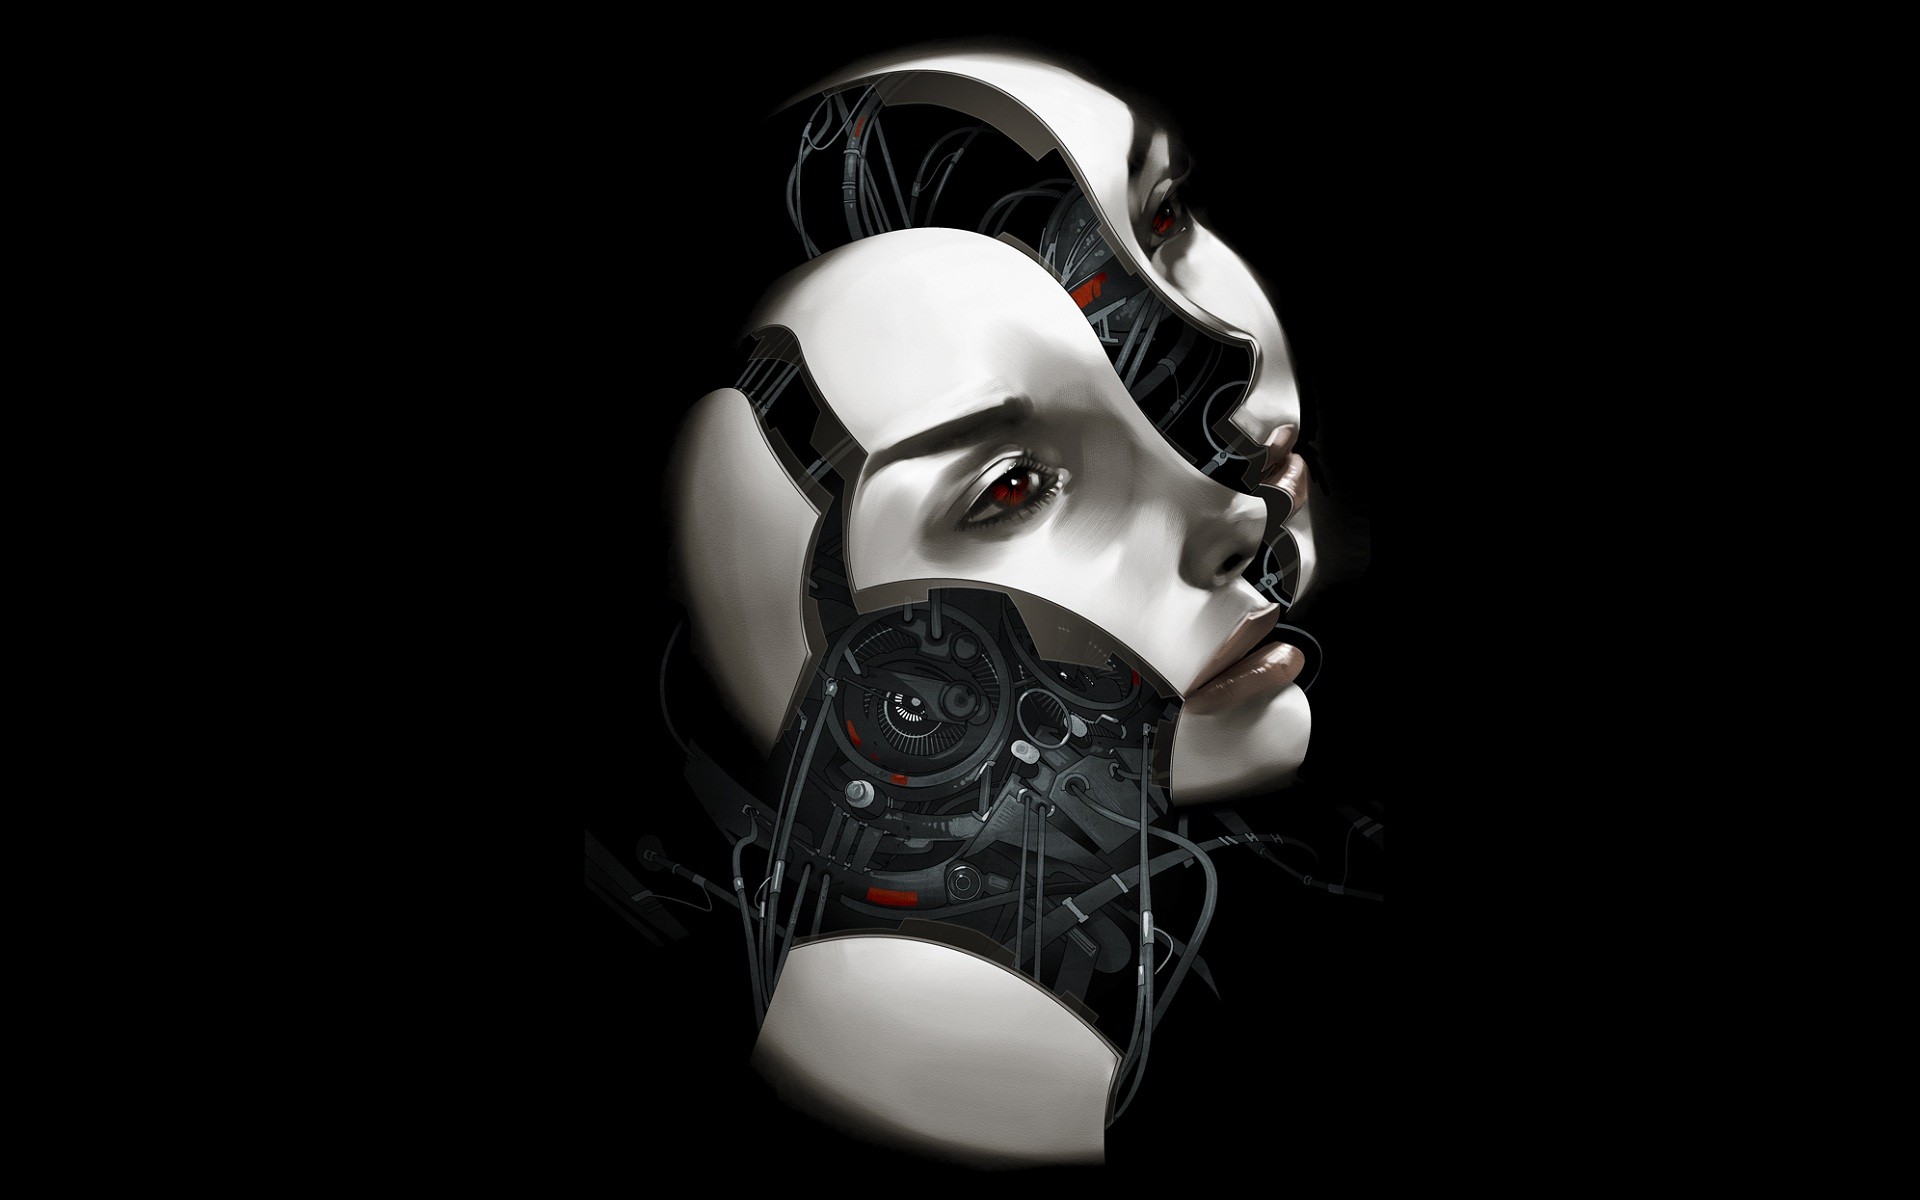 General 1920x1200 digital art black background minimalism women robot face androids technology wires book cover science fiction machine simple background futuristic